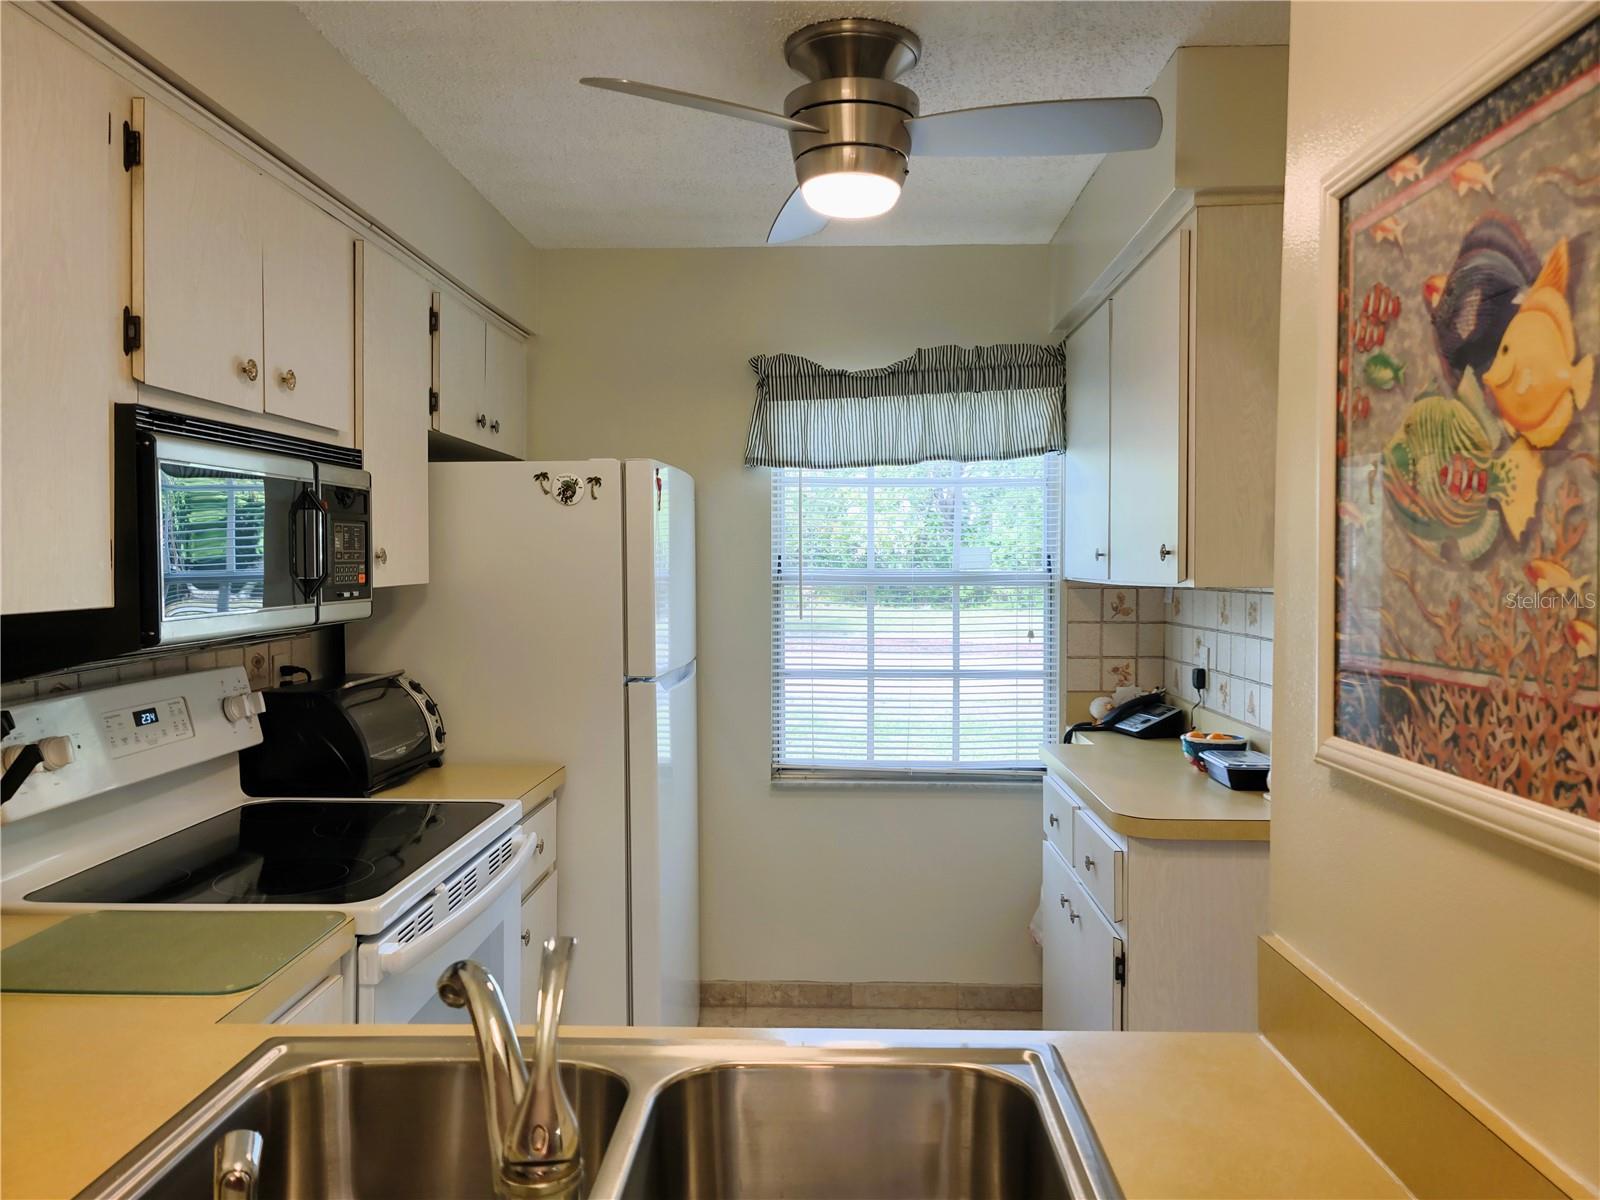 Kitchen features stainless steel sink, glass top range, microwave, new ceiling fan and refrigerator.